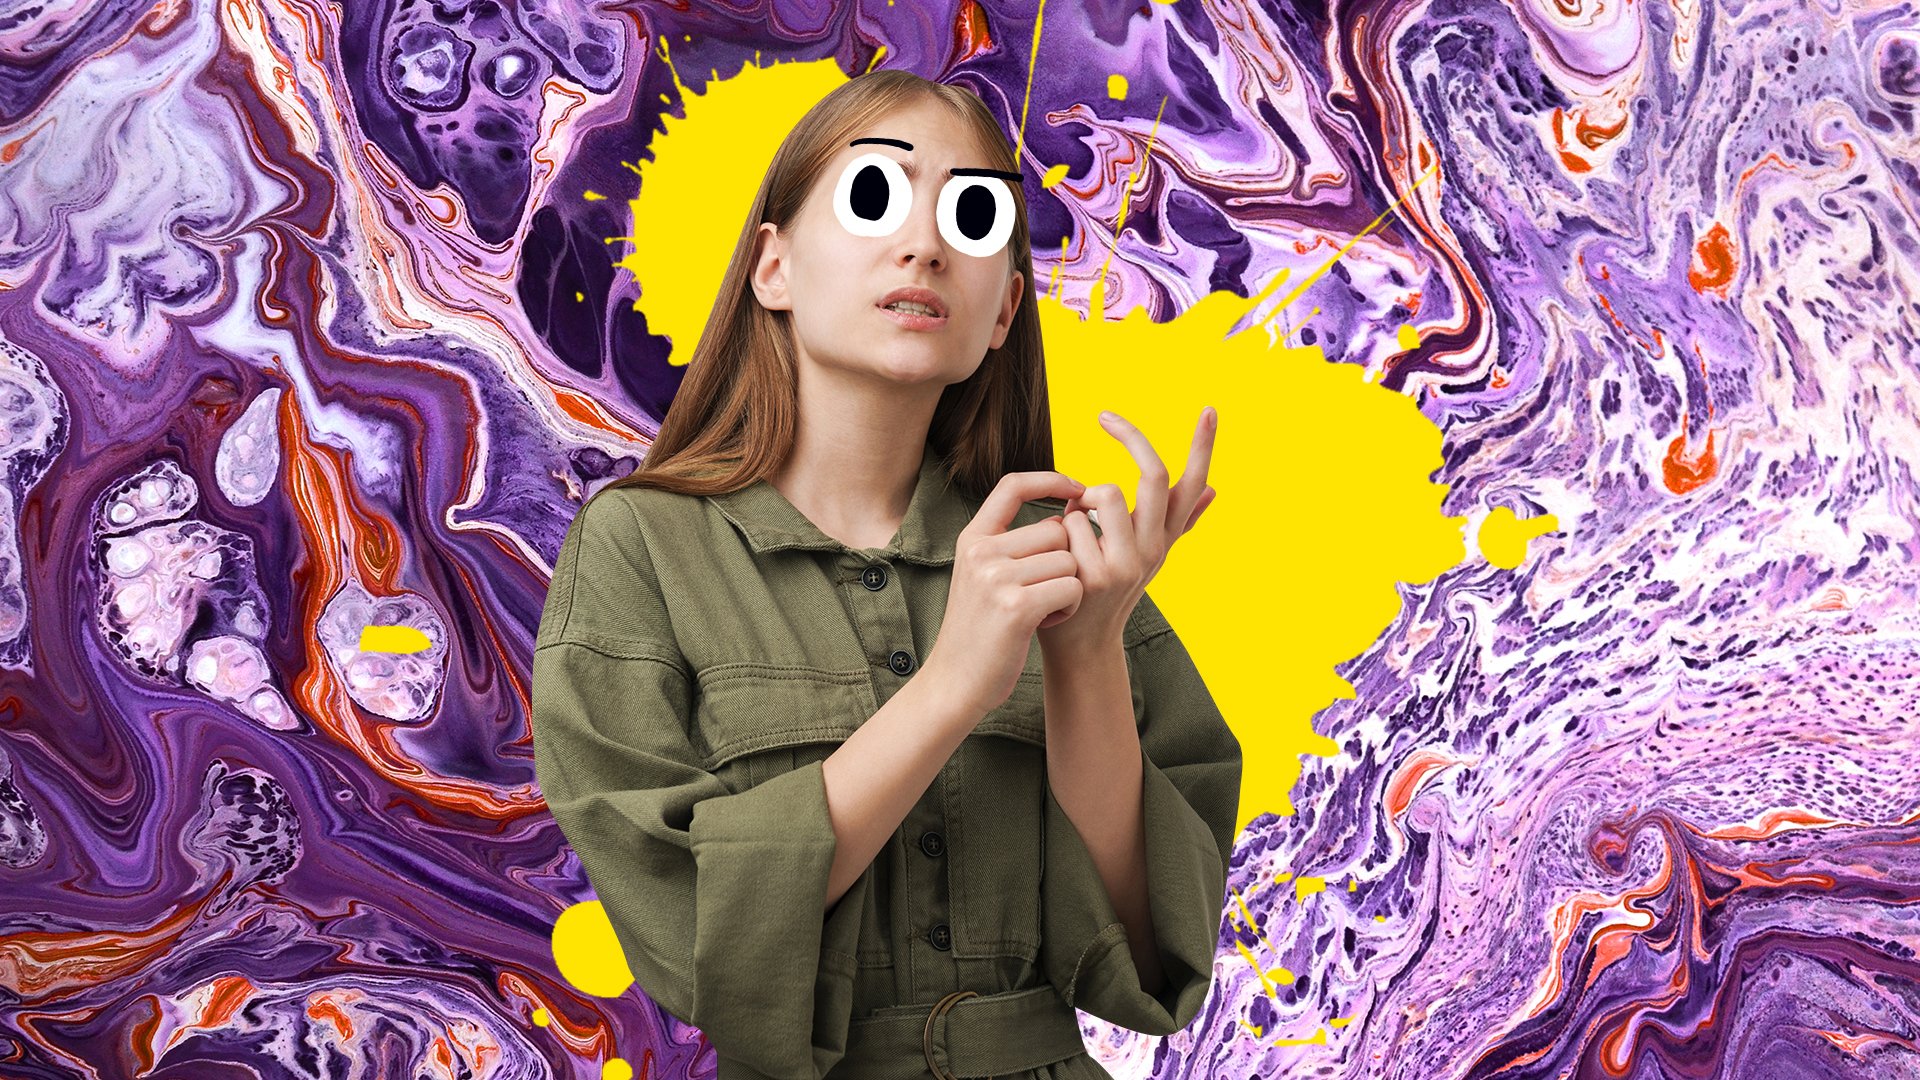 A person counting with a swirly purple background